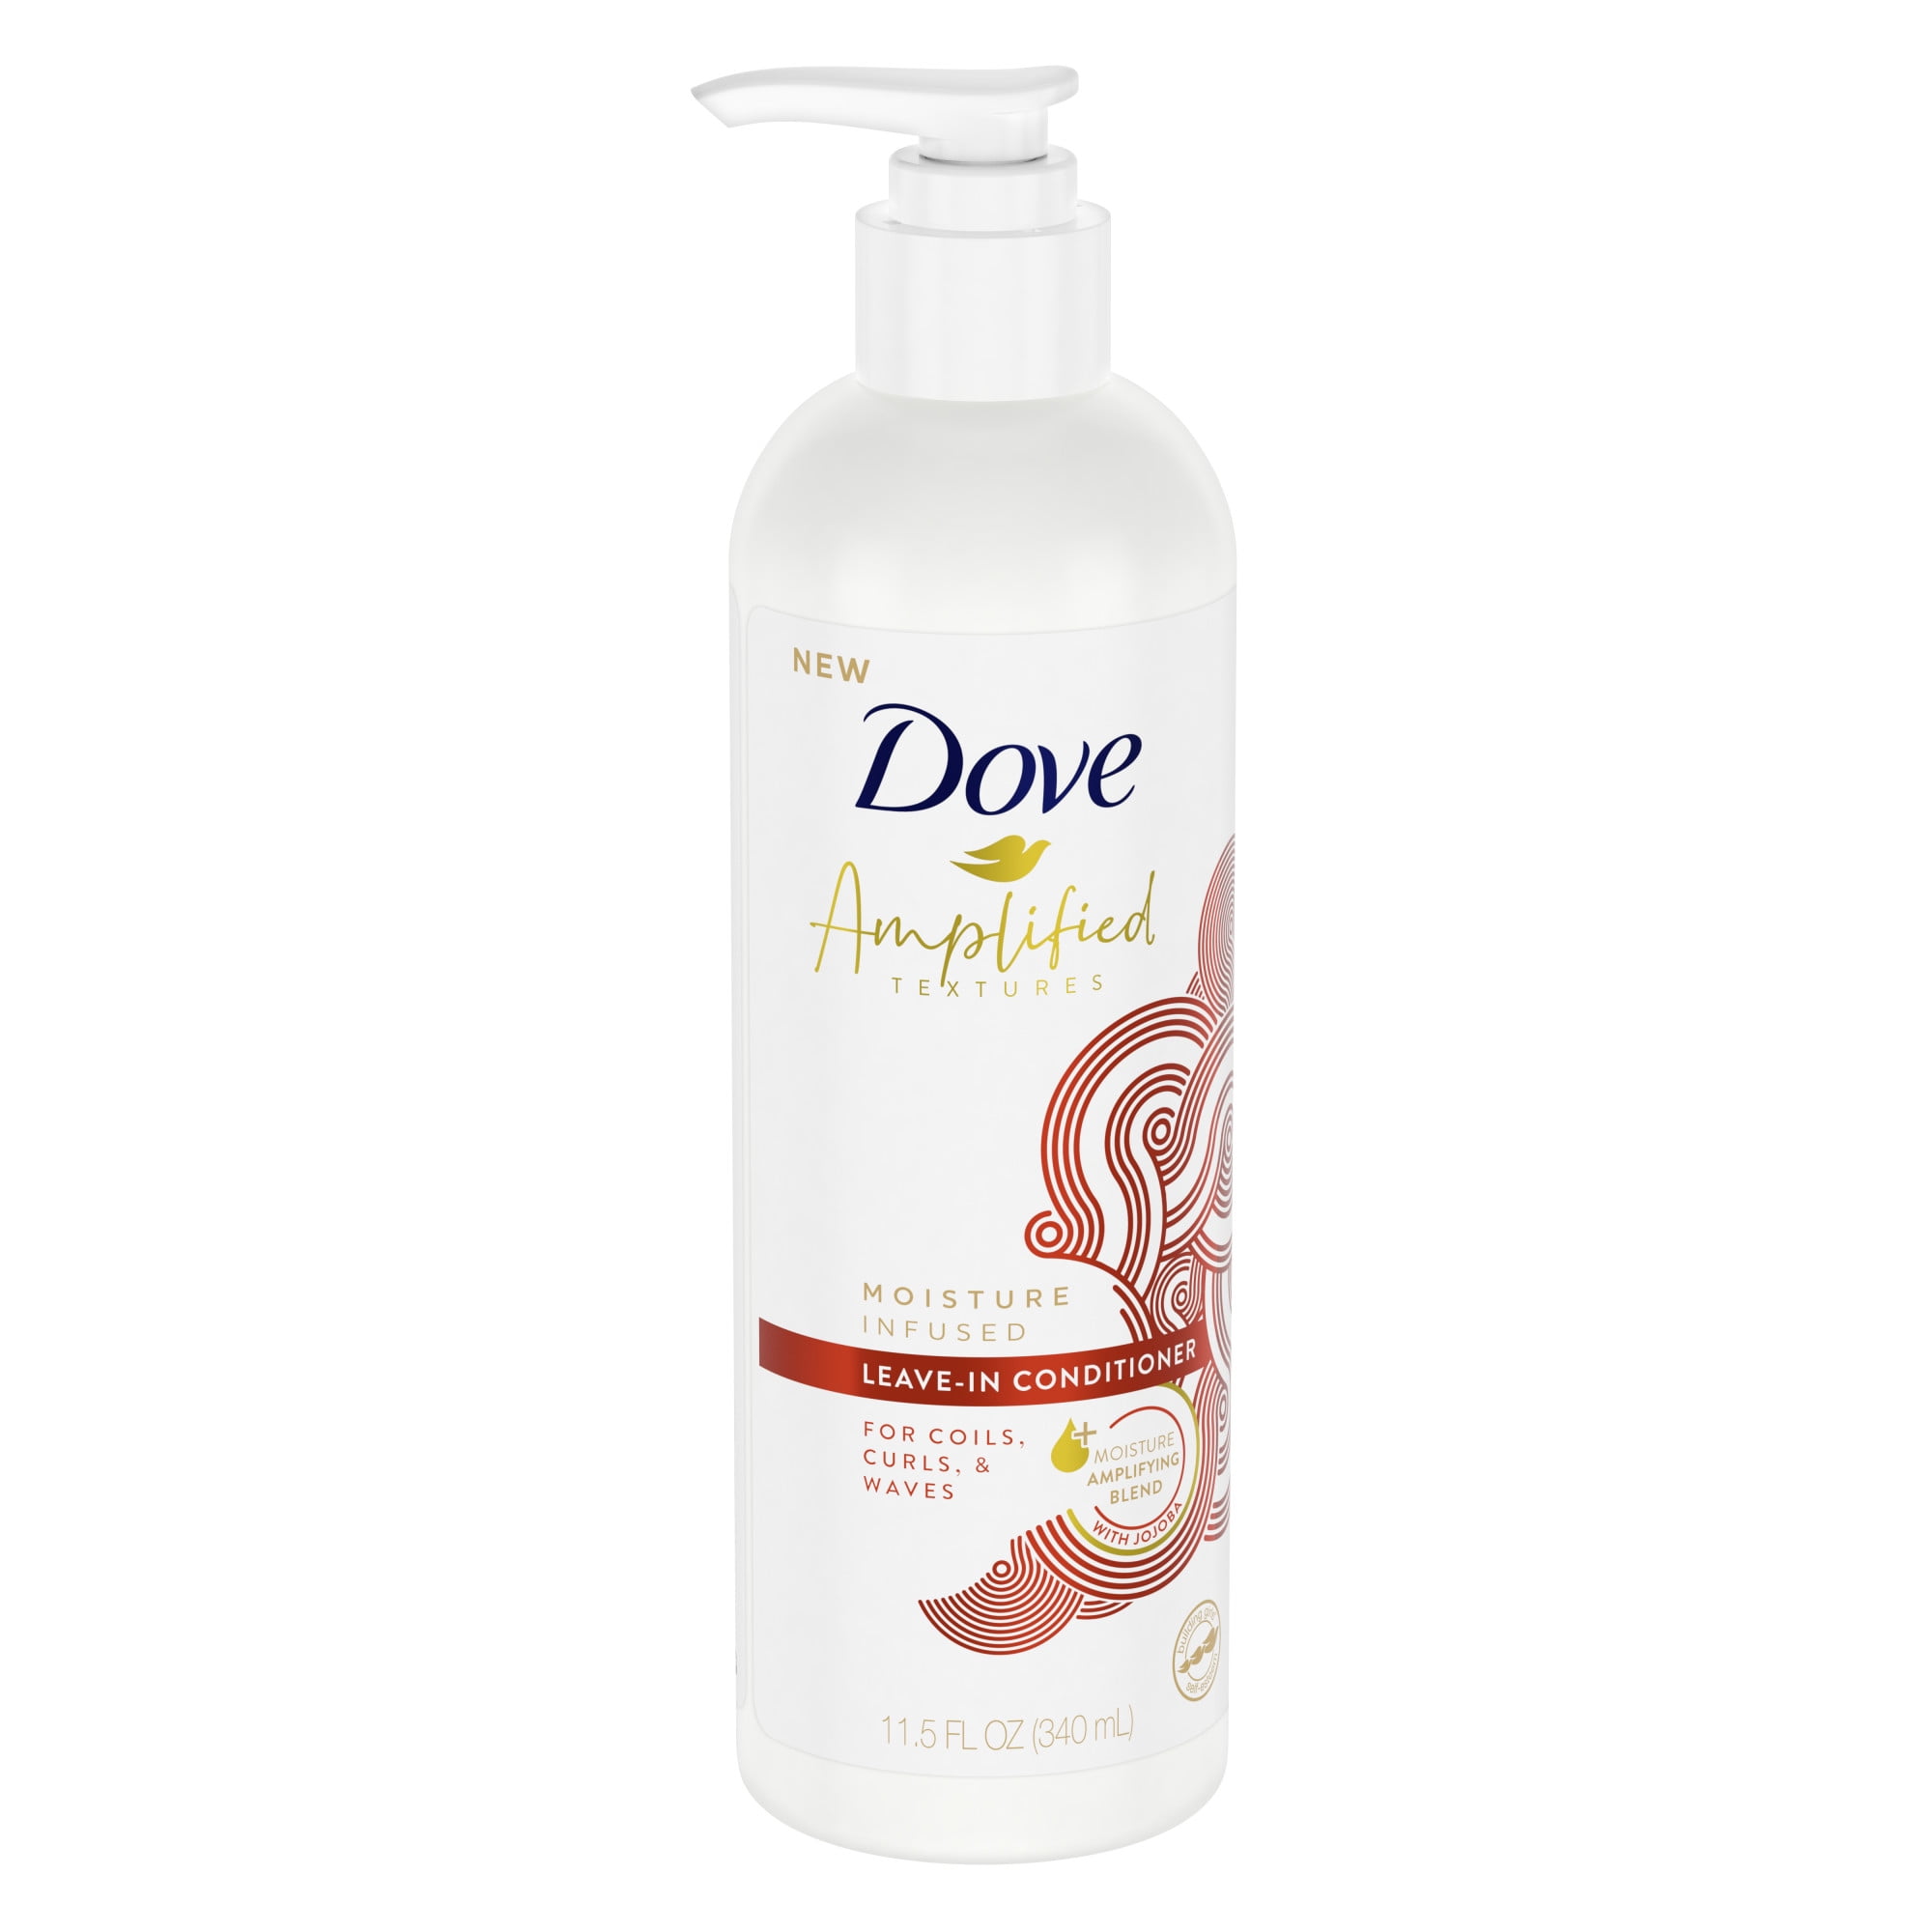 Dove Moisturizing Leave-In Conditioner, Detangler with Jojoba for Coils, Curls and Waves, 11.5 oz